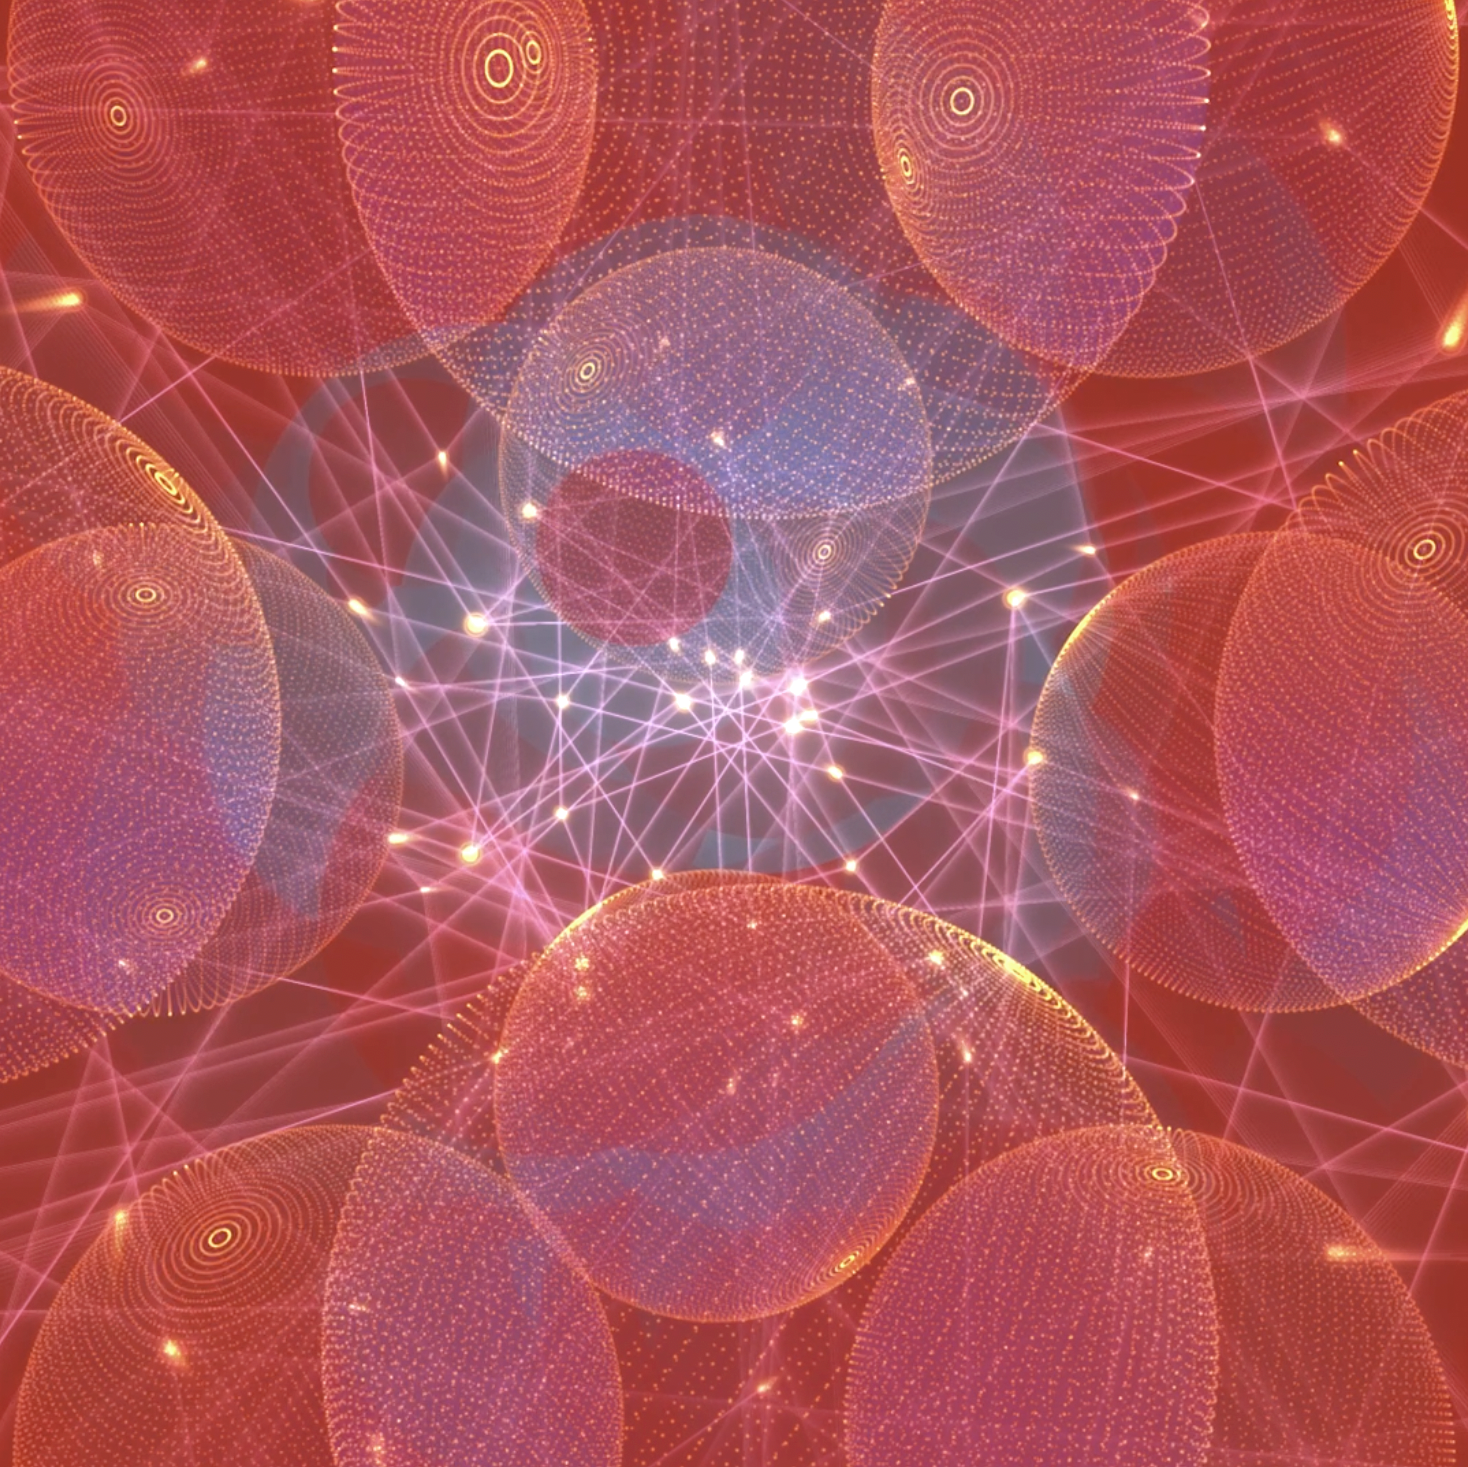 A digital image of layered transparent pink spheres, connected by rods that glow at their intersections